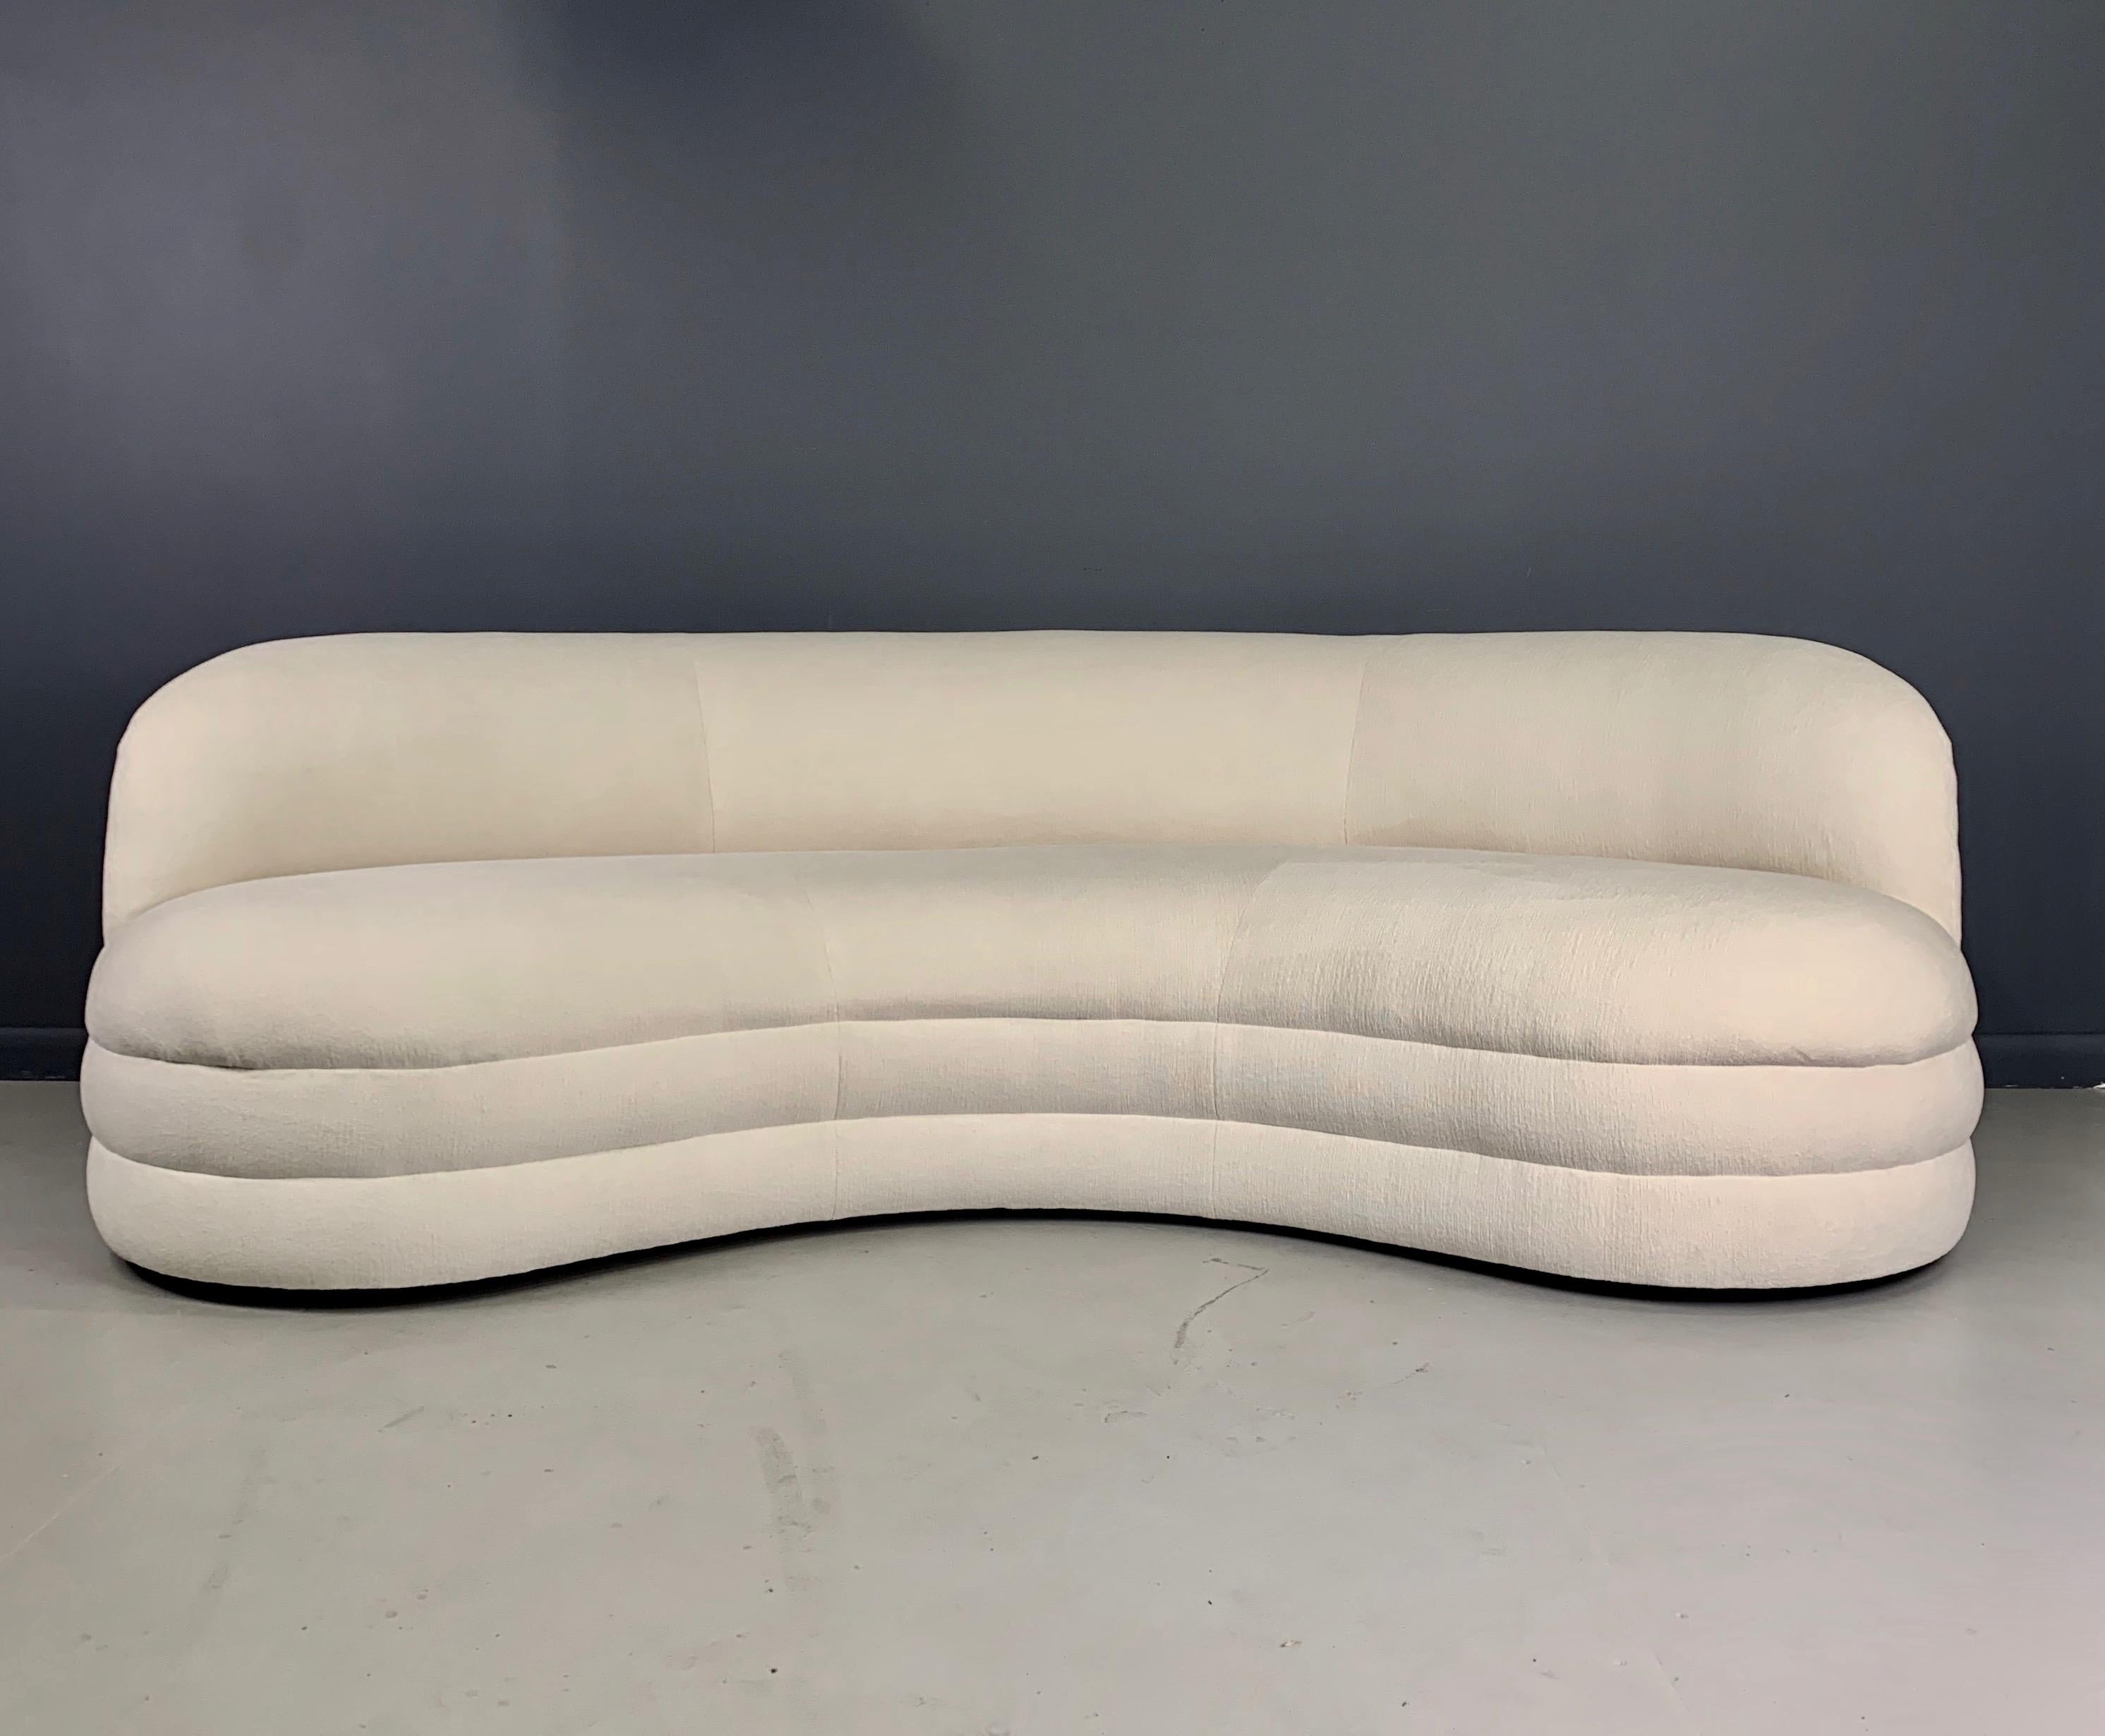 A kidney-shaped sofa that features a nice sculptural modern design, with a curved arched back. These sofas are newly produced and have been handcrafted with a solid hardwood frame, manufactured in the United States with an 7 to 10 week turnaround.